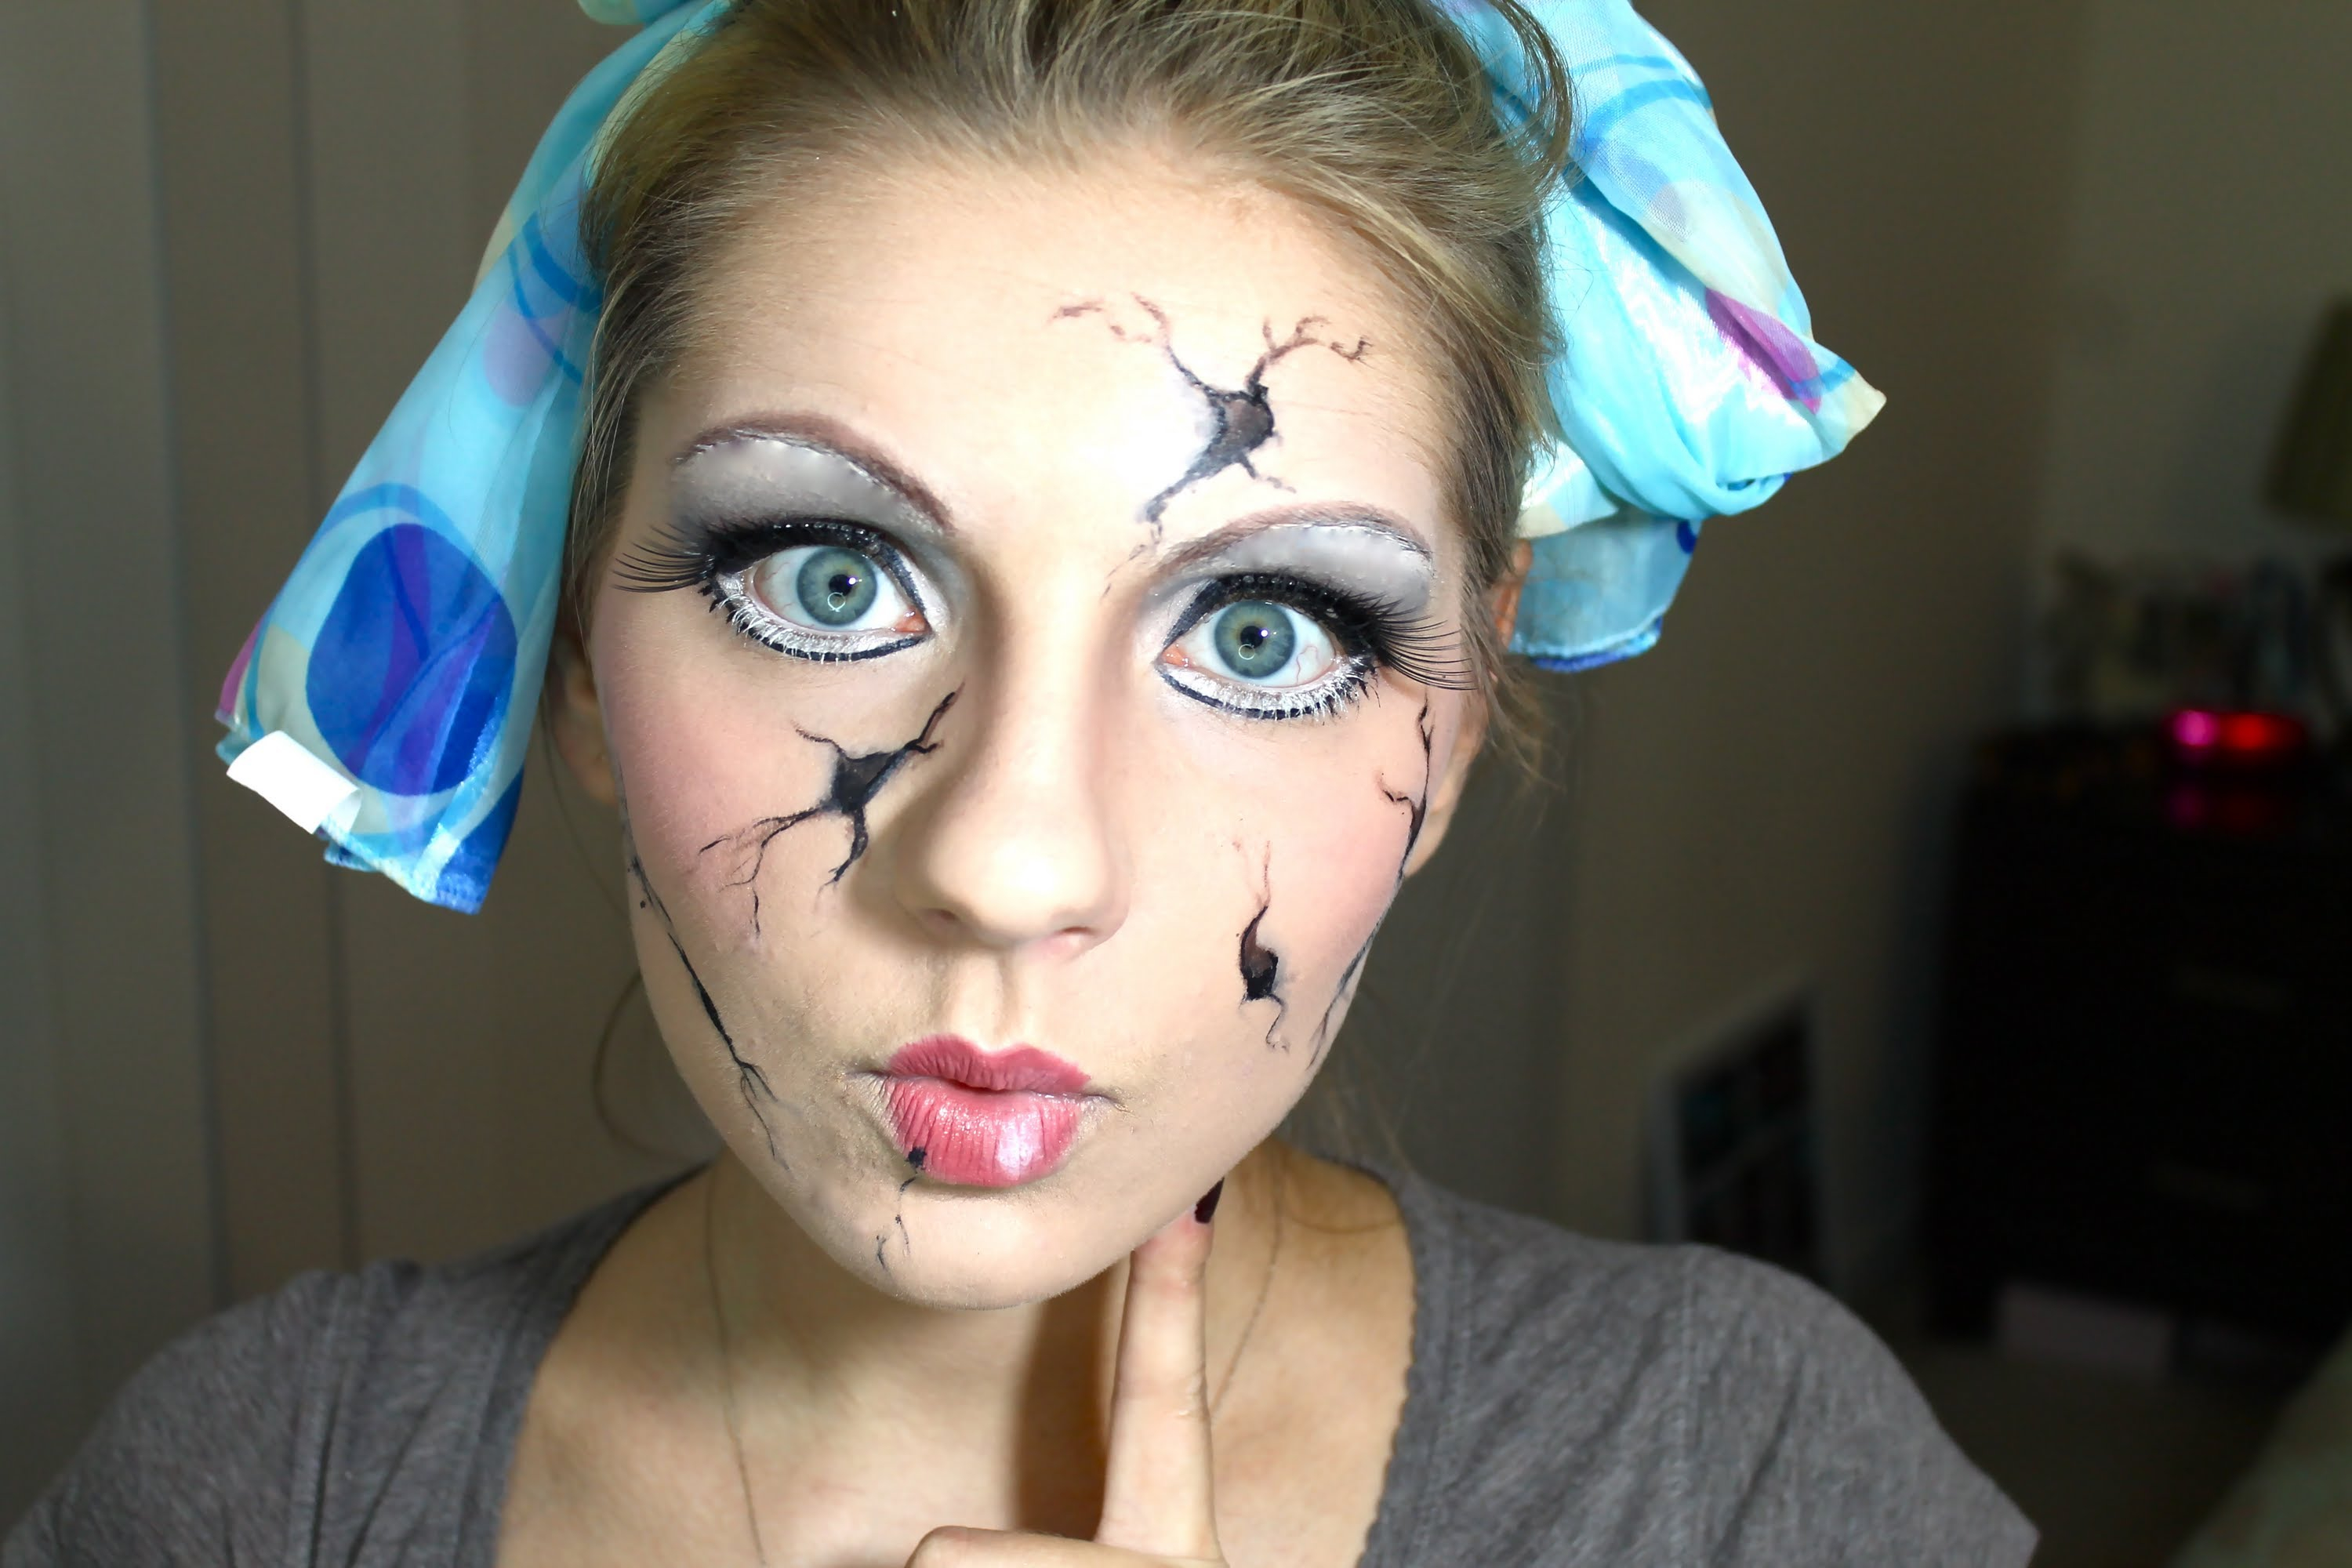 Scary Eye Makeup 8 Cracked Doll Halloween Makeup Tutorials For A Cute Creepy